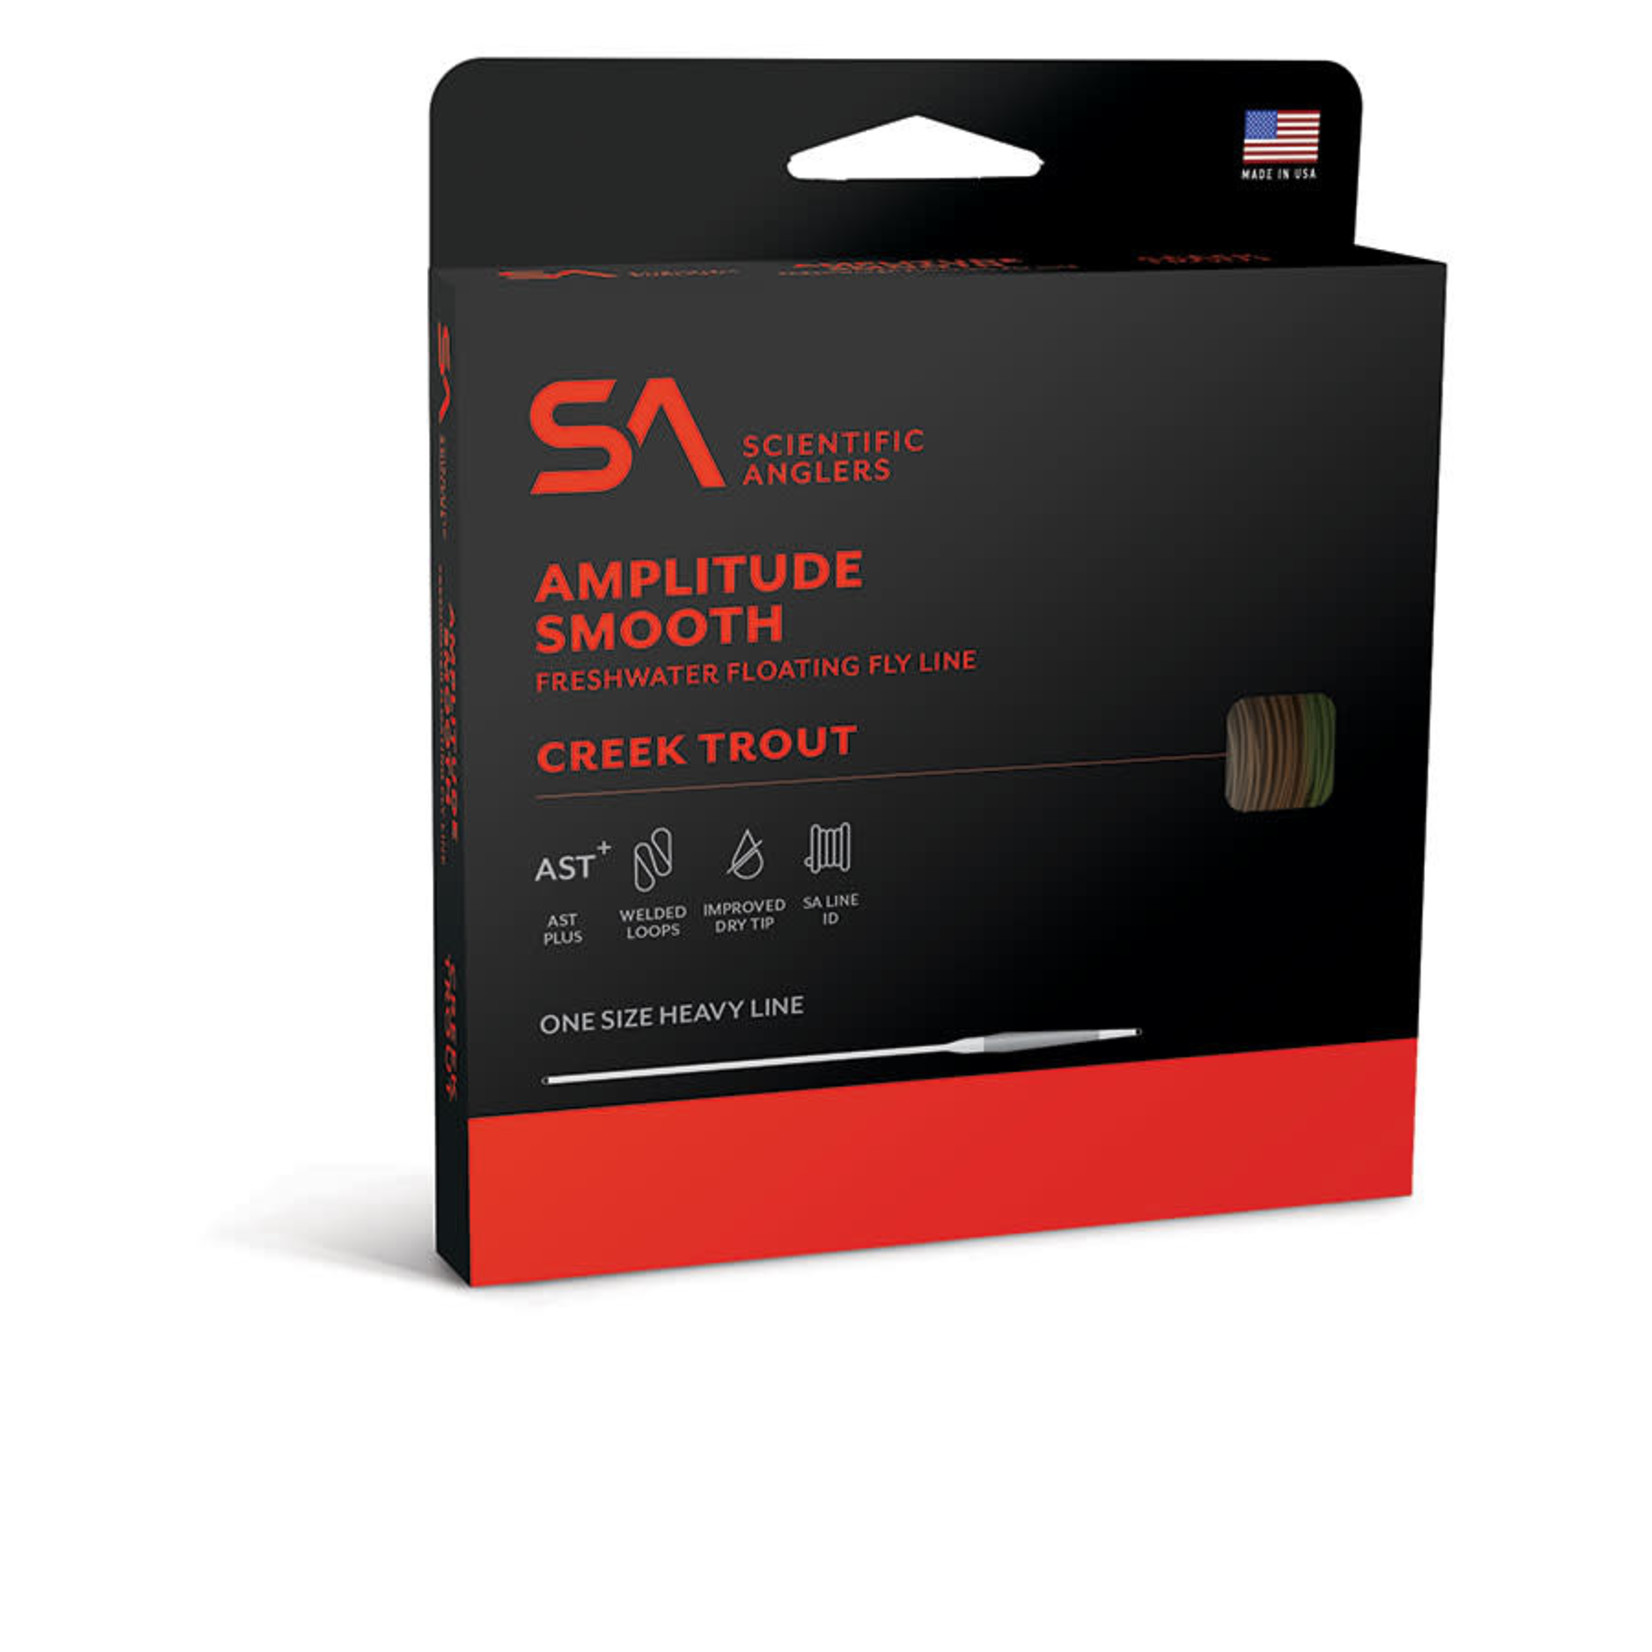 SCIENTIFIC ANGLERS SA Creek Trout Amplitude Fly Line